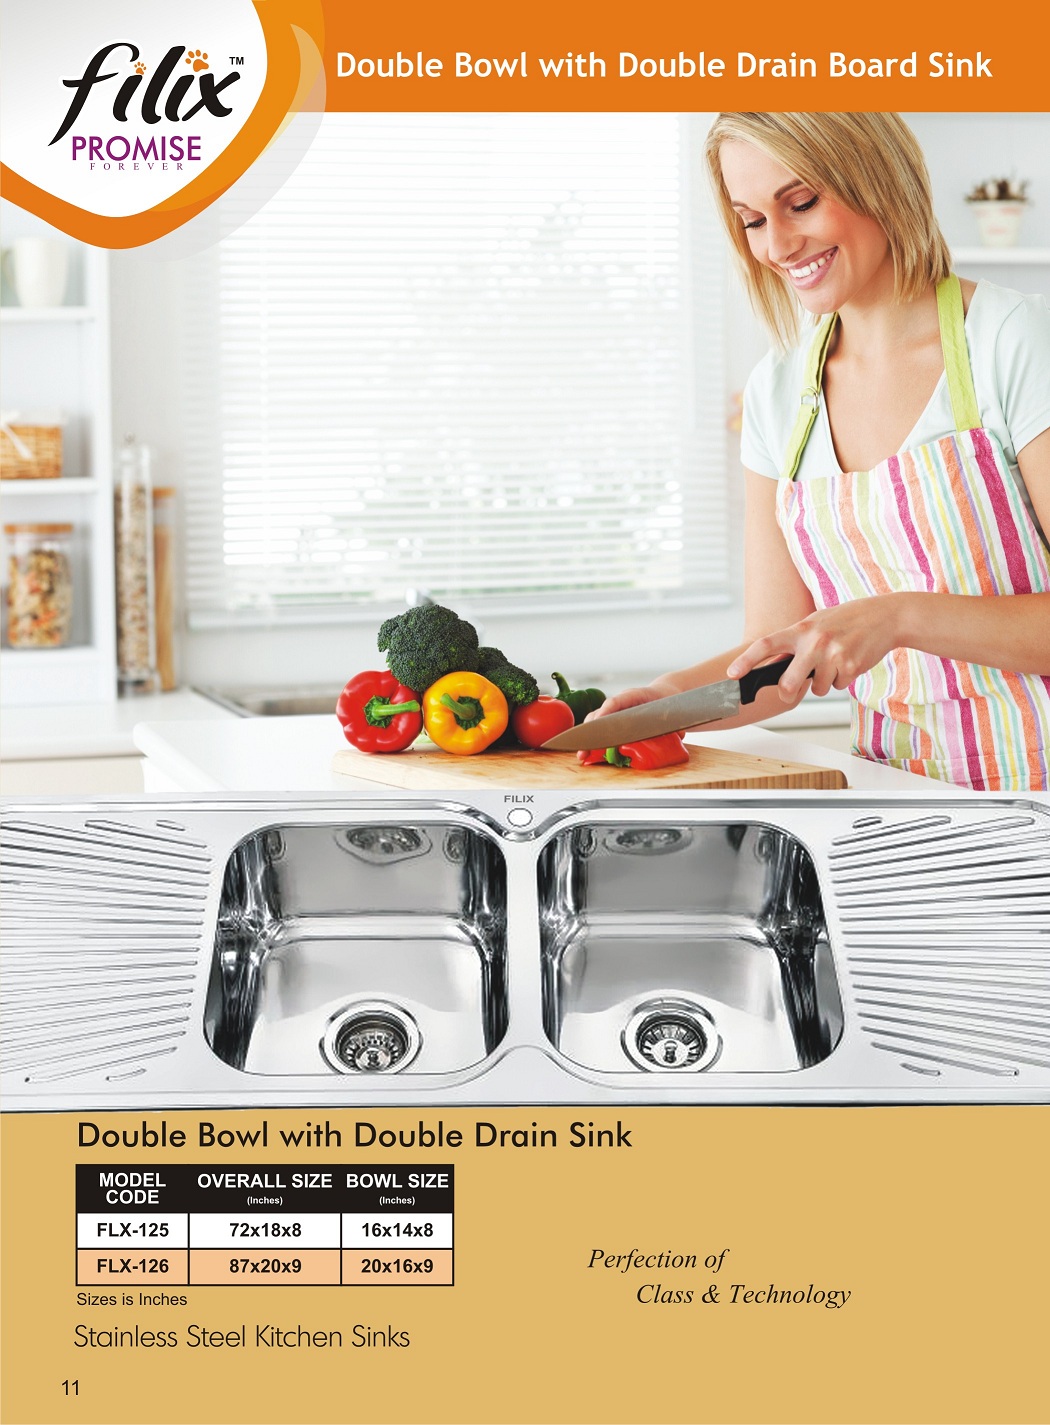 filix Double Bowl With Double Drain Board Sink